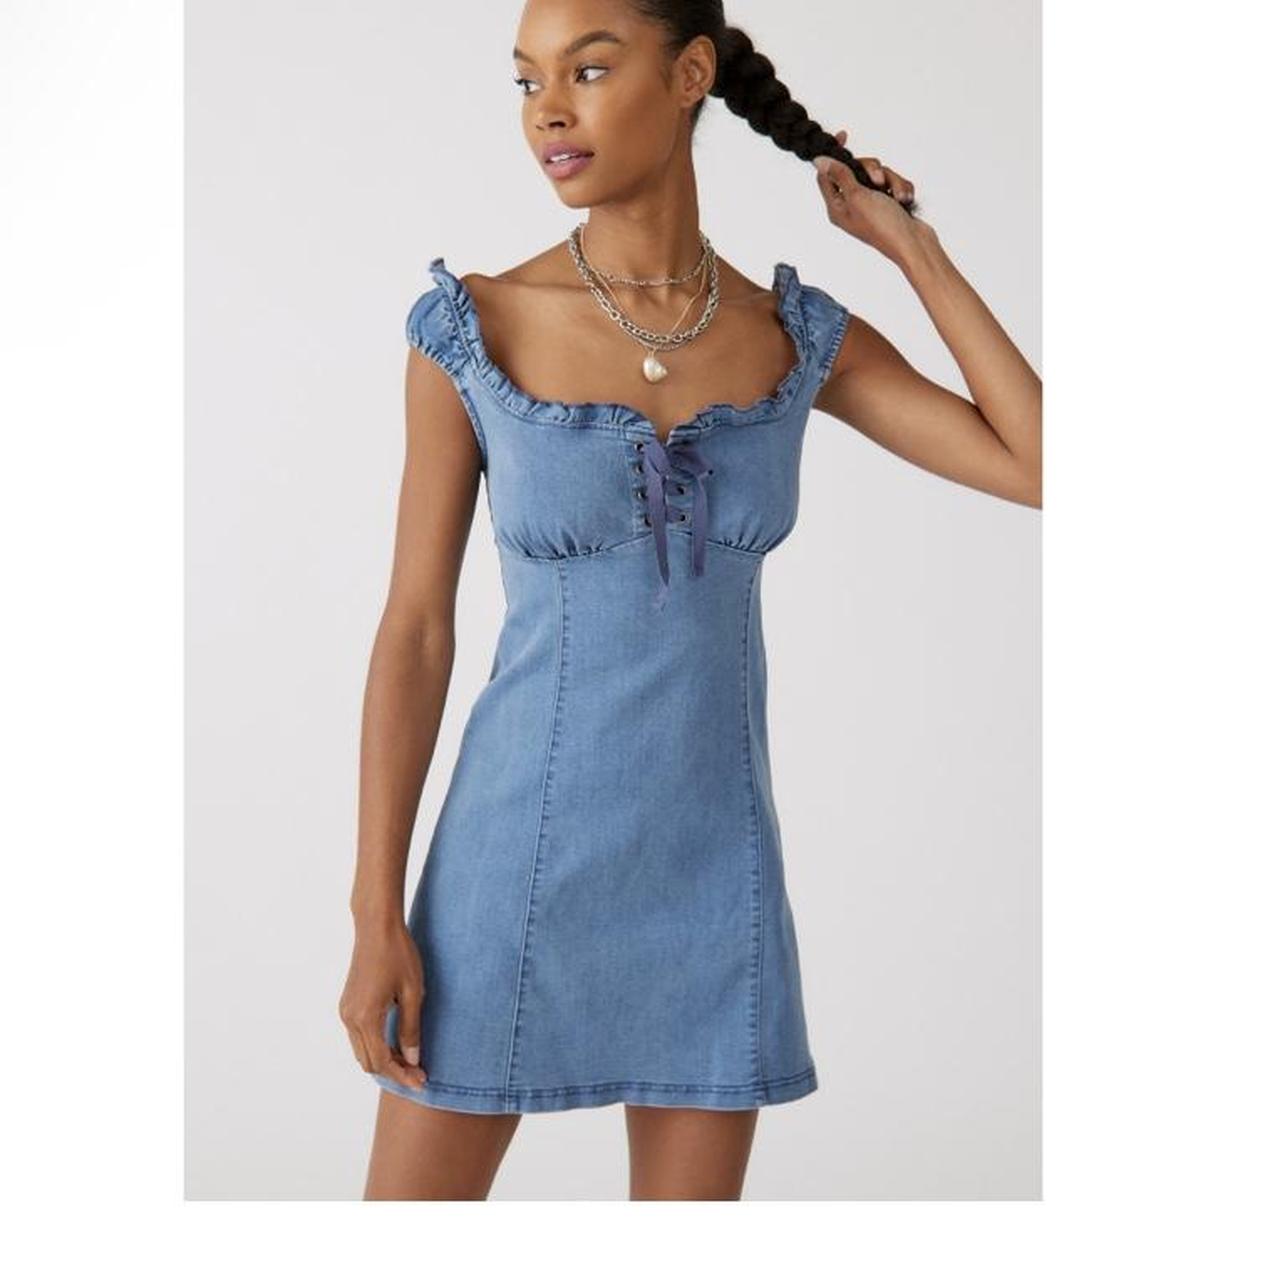 UO denim dress with ruffle sleeves selling because... - Depop